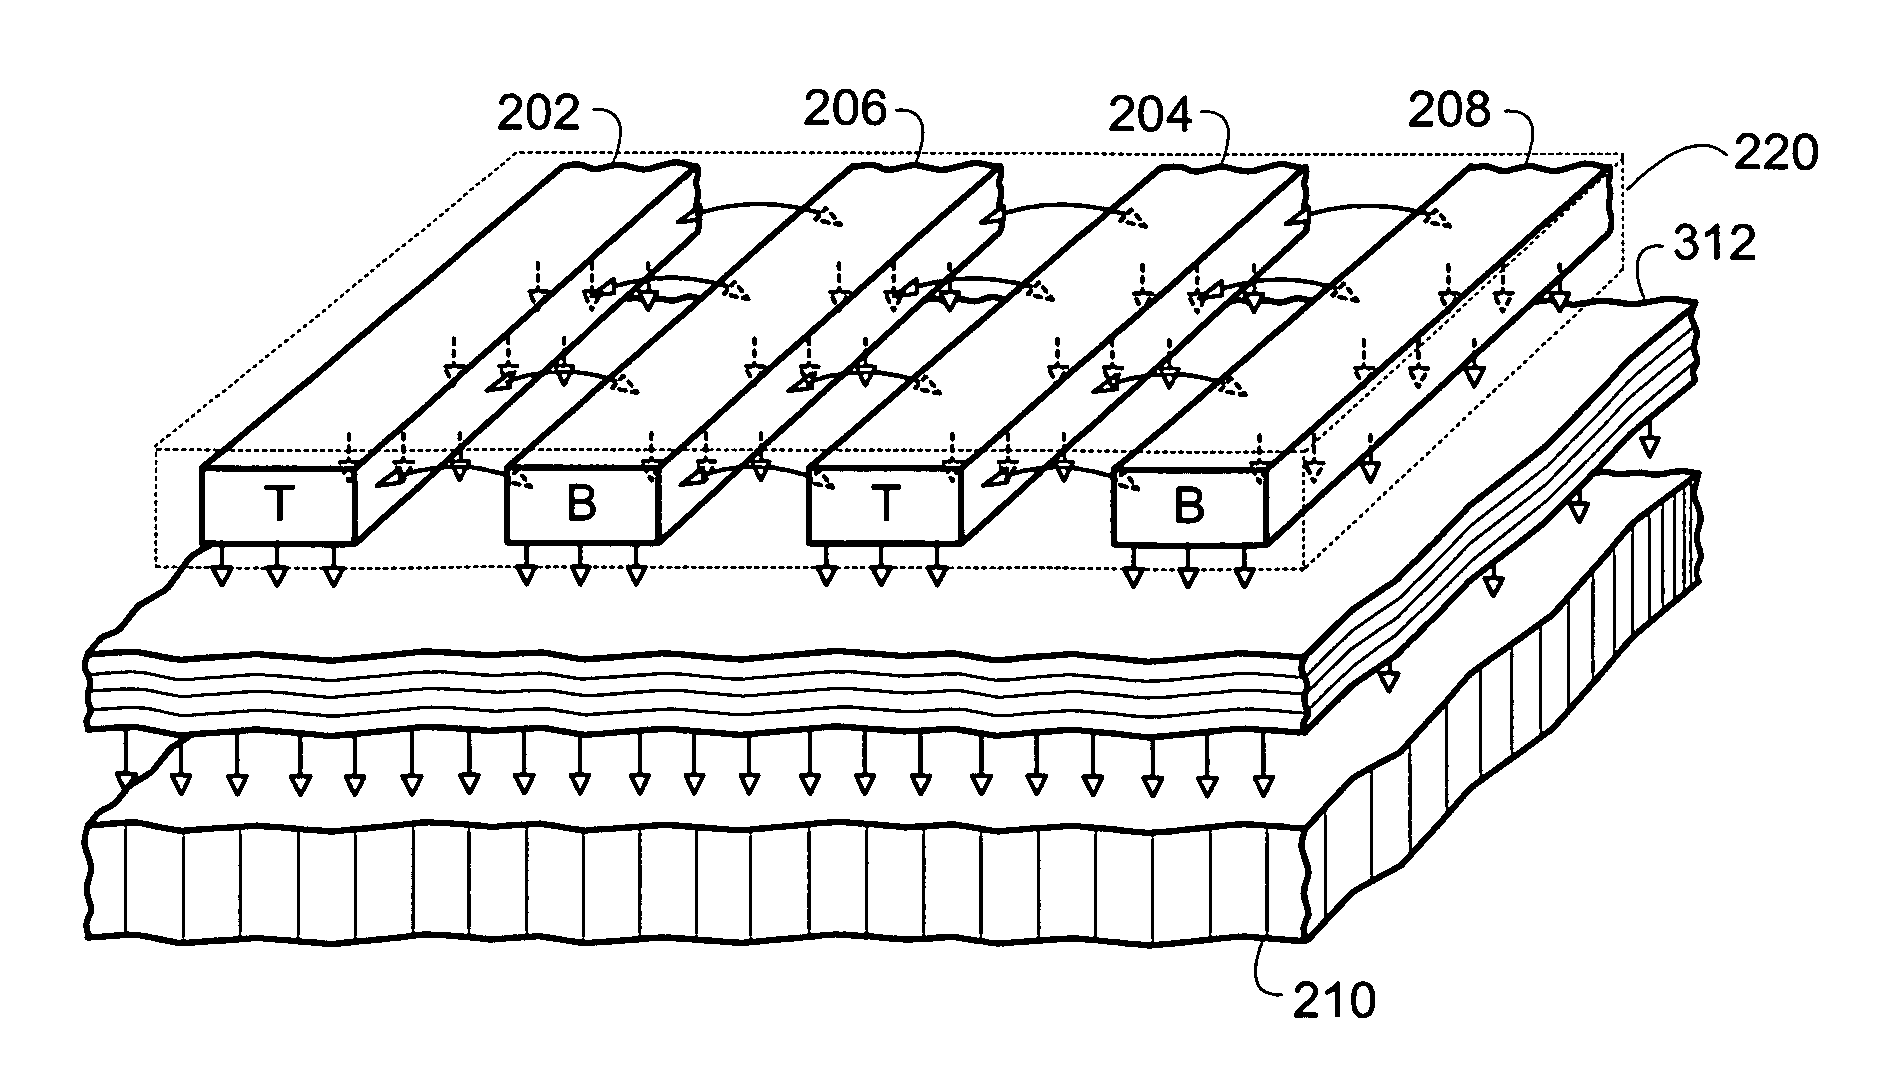 Fringe capacitor using bootstrapped non-metal layer